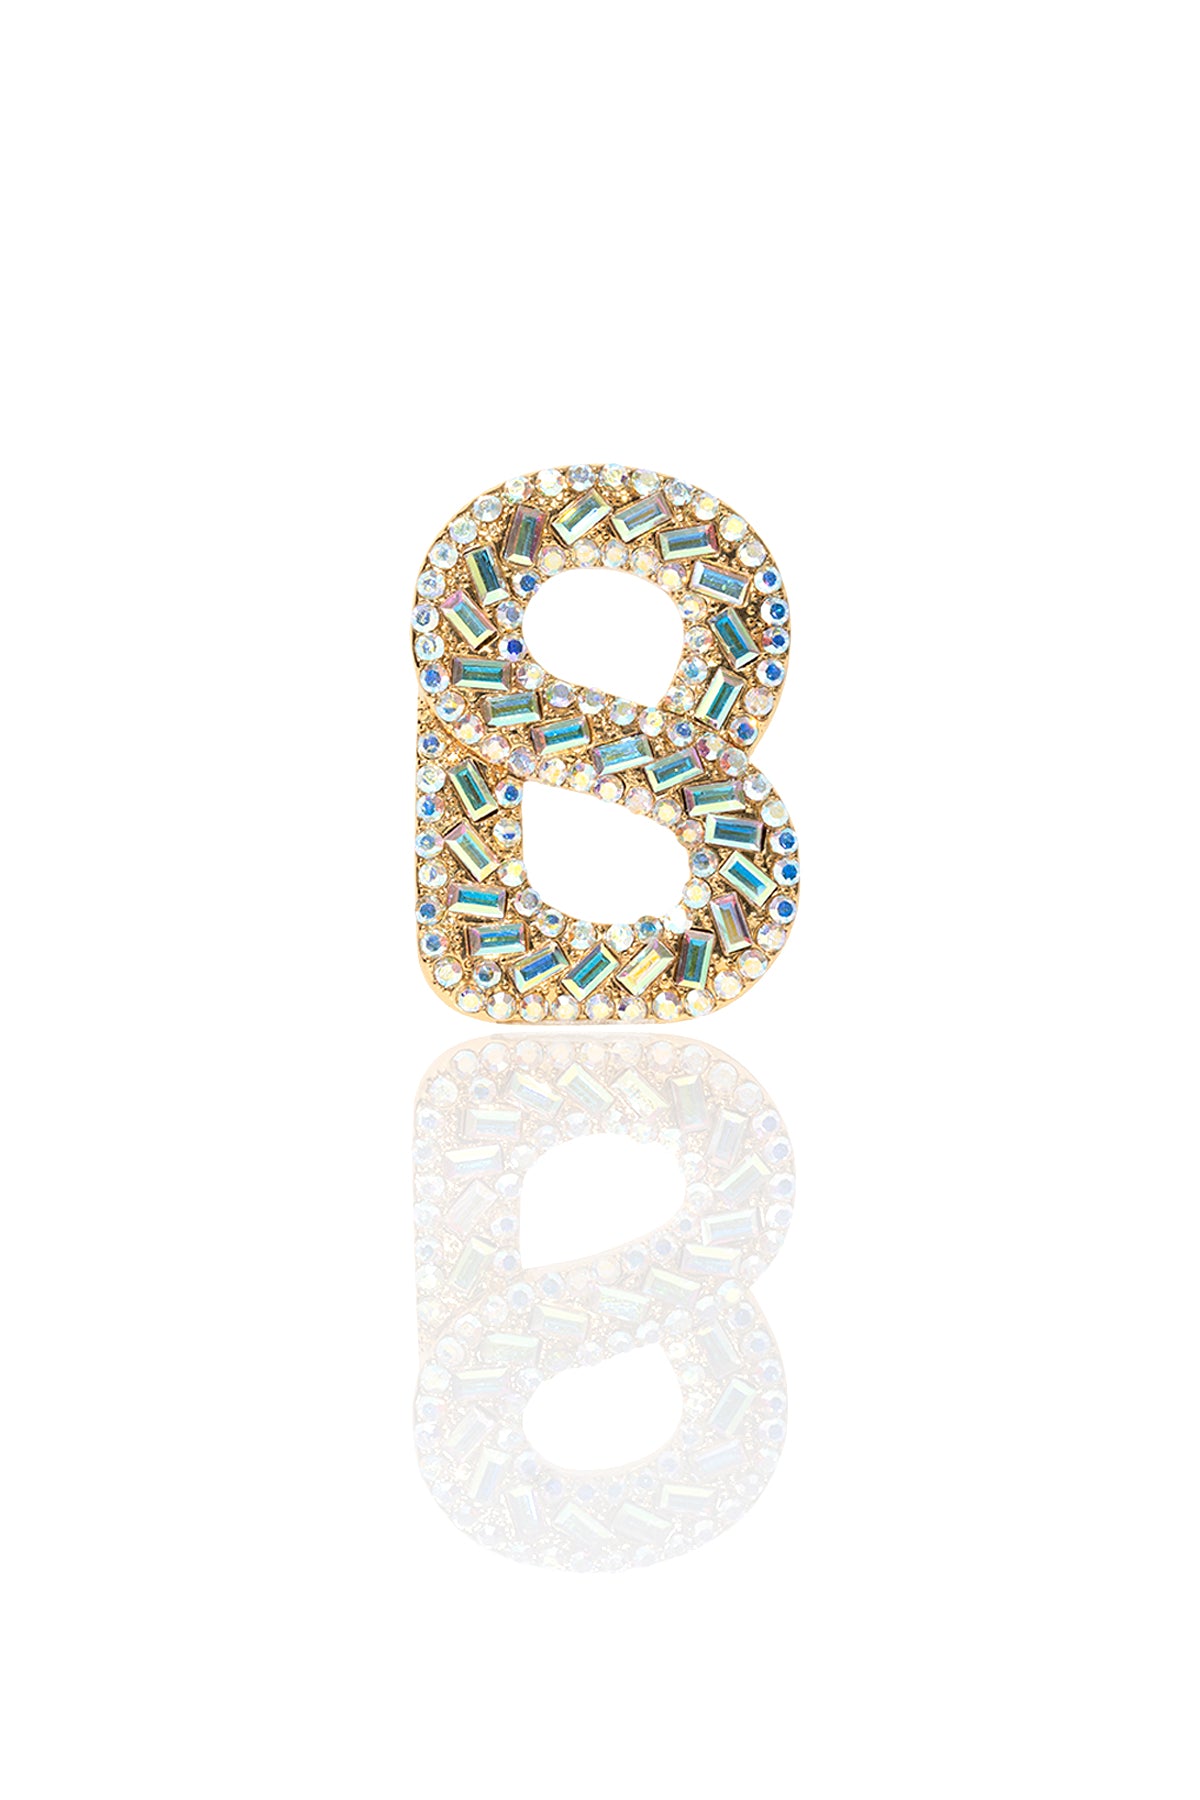 Luxe Signature Multi Crystal Brooch - Gold Iridescent